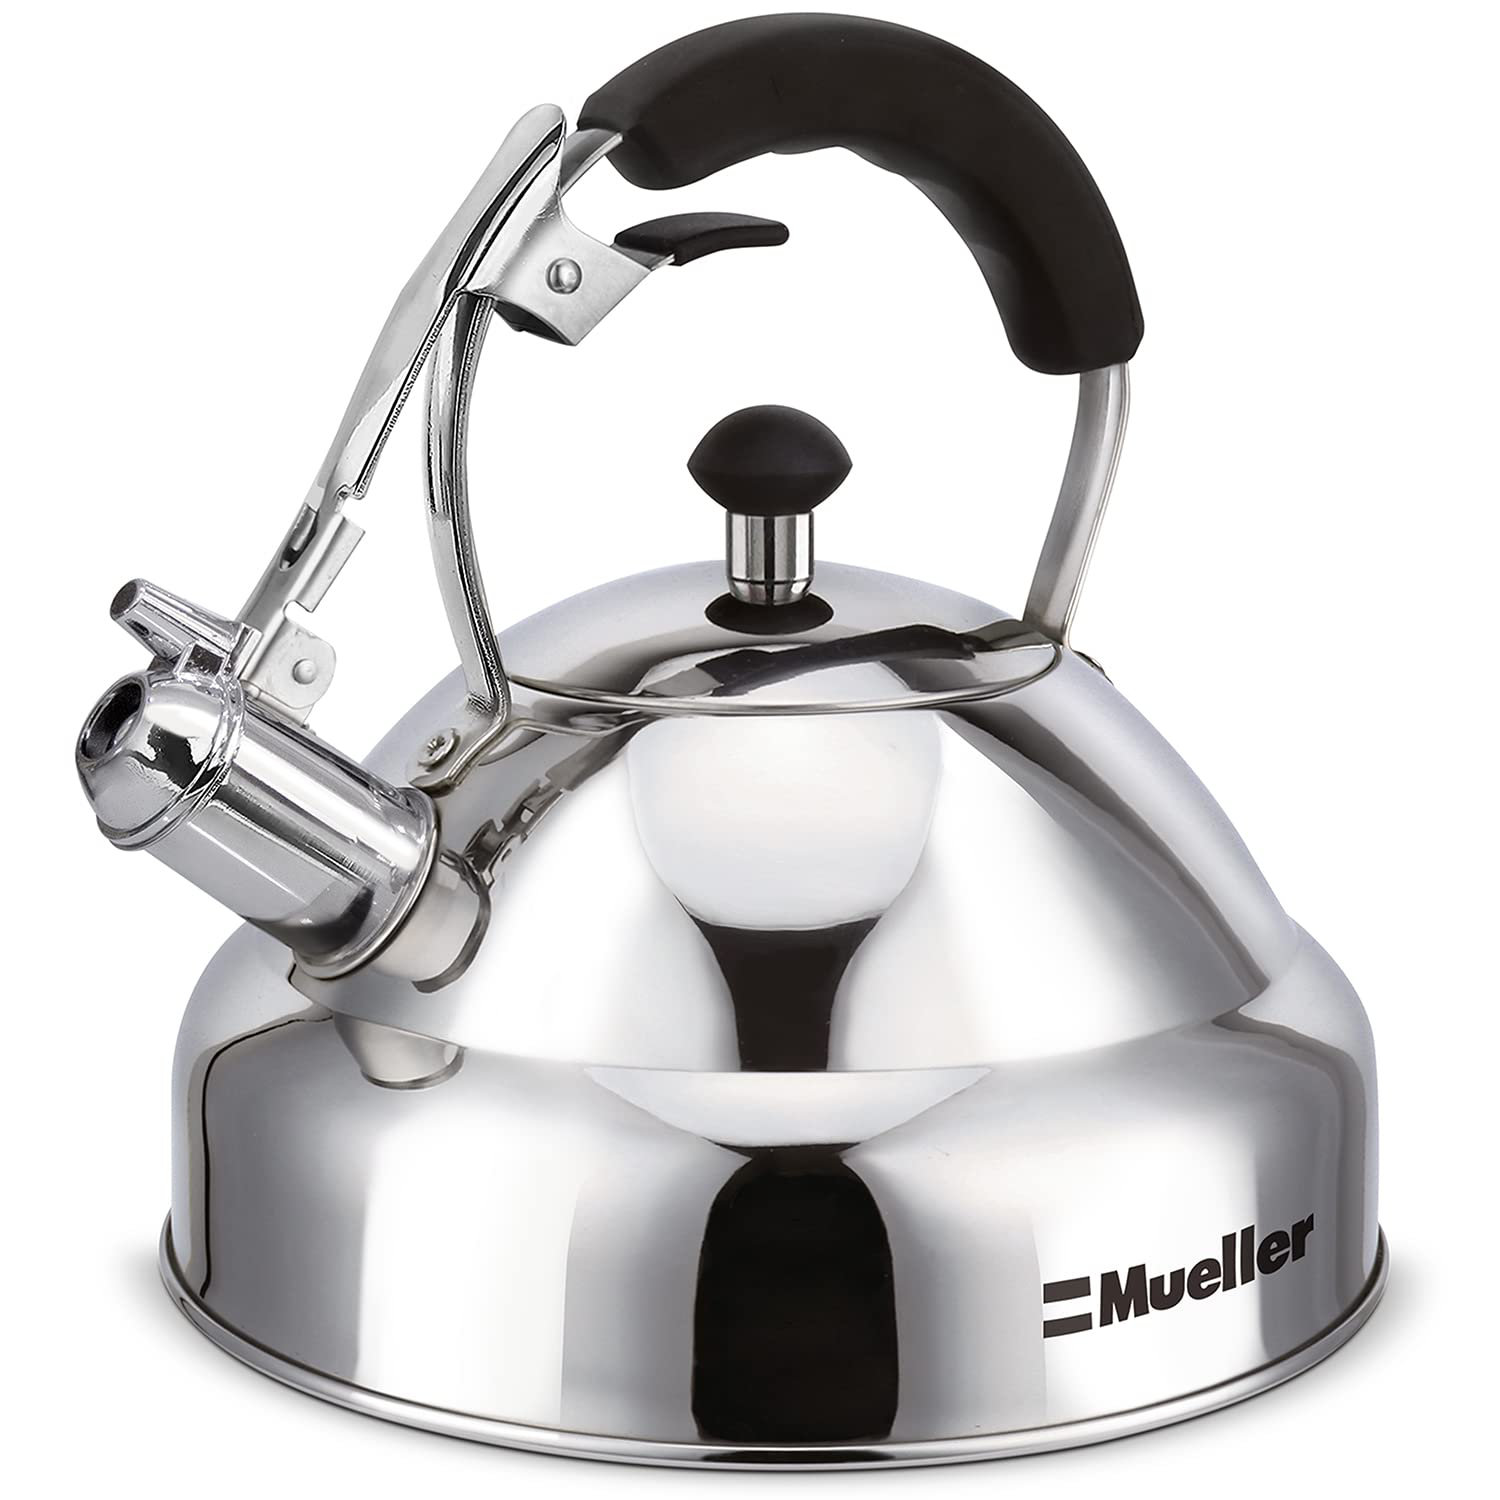 LUXESIT 2.8 Quarts Stainless Steel Whistling Stovetop Tea Kettle